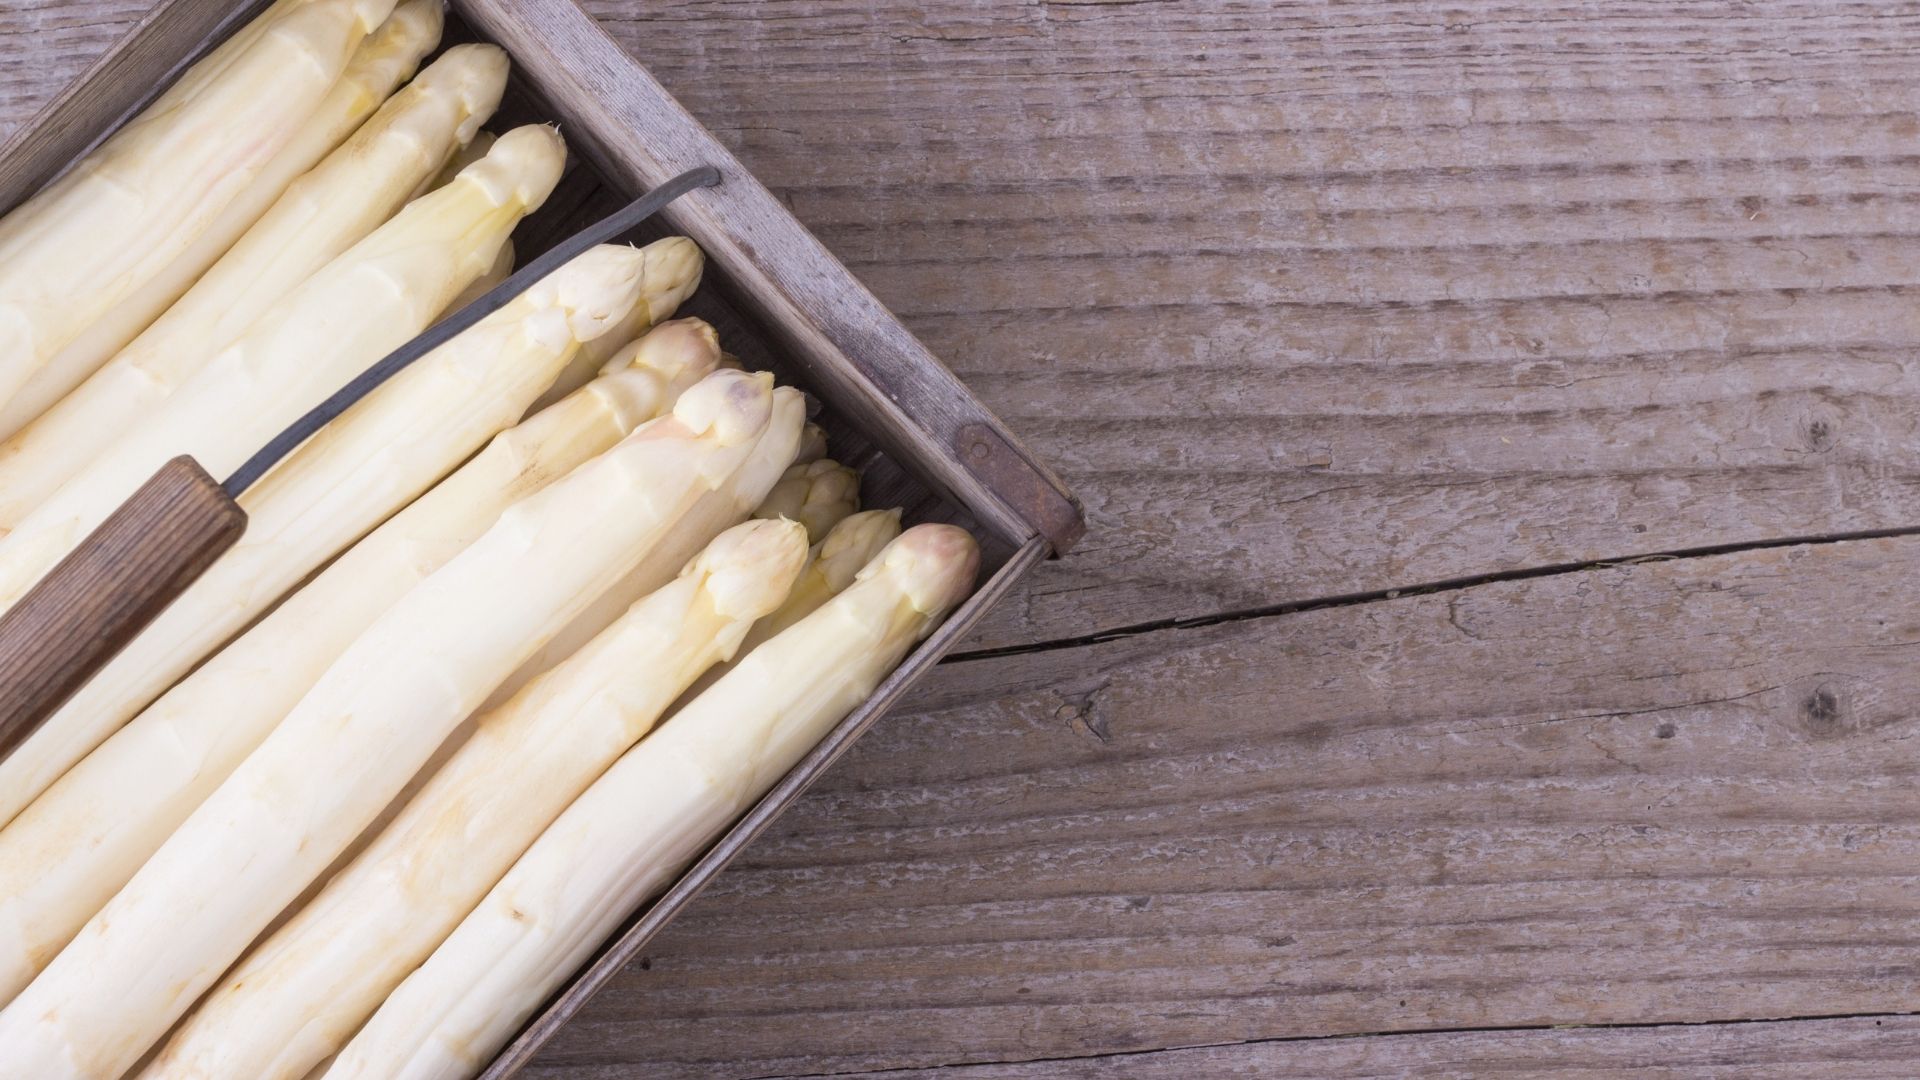 birds eyes view of white asparagus sitting in a basket on top of a wood grain table